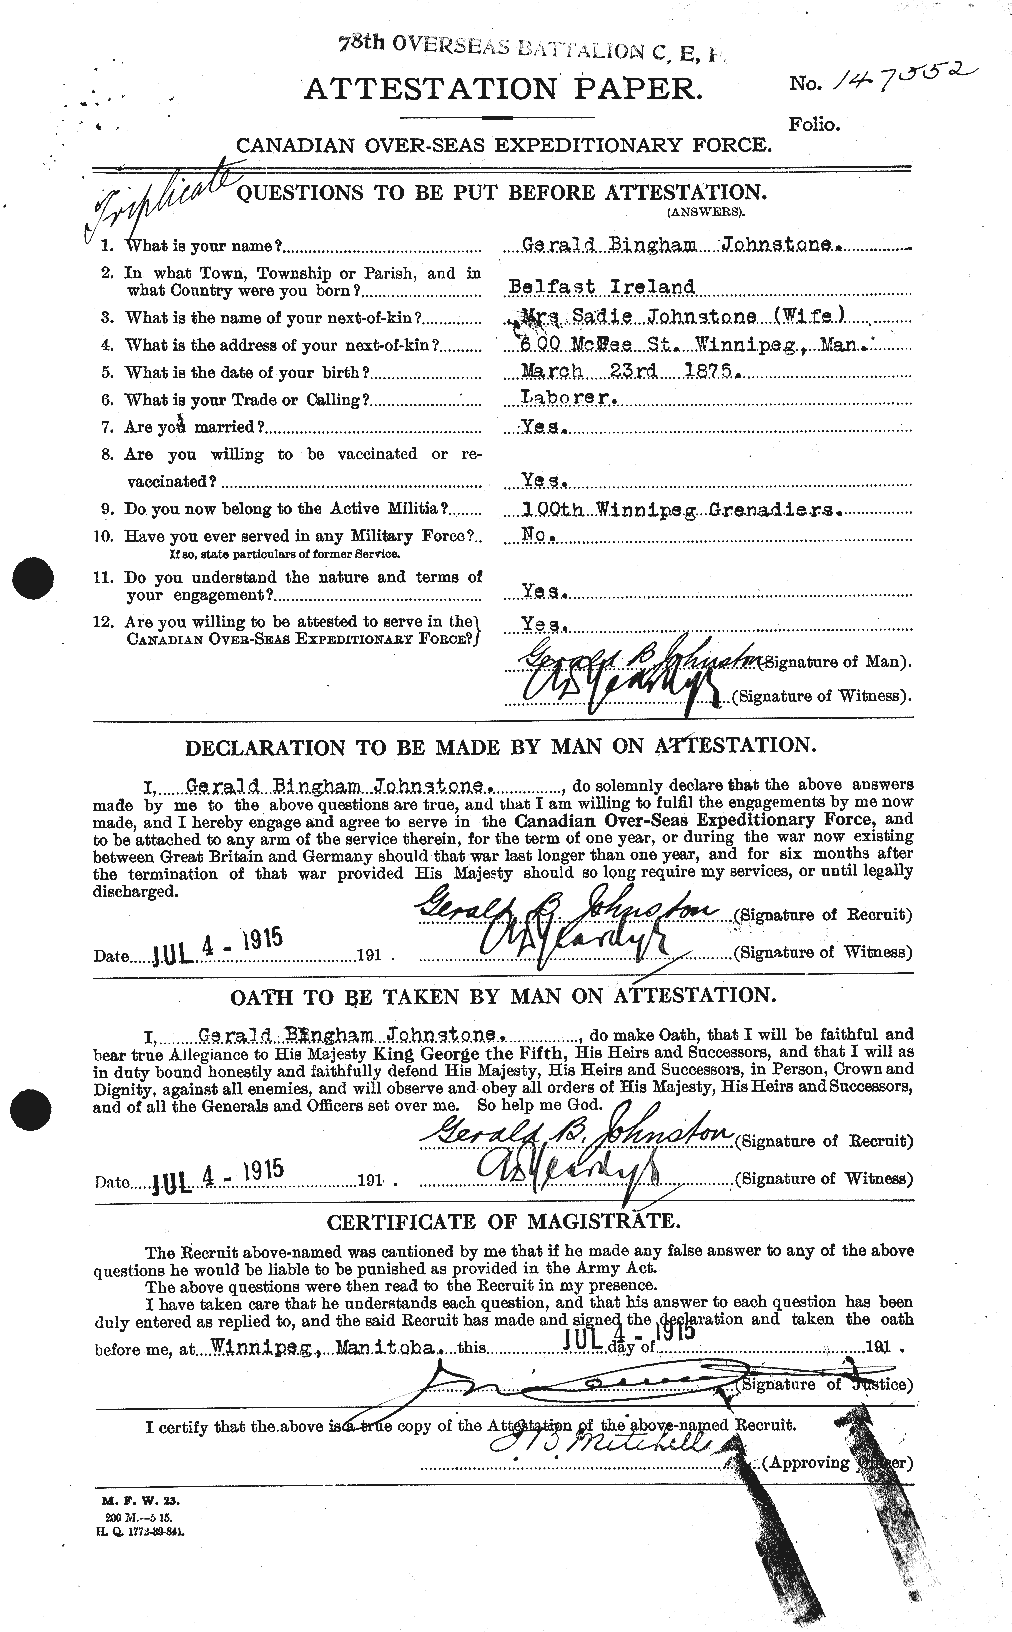 Personnel Records of the First World War - CEF 419598a